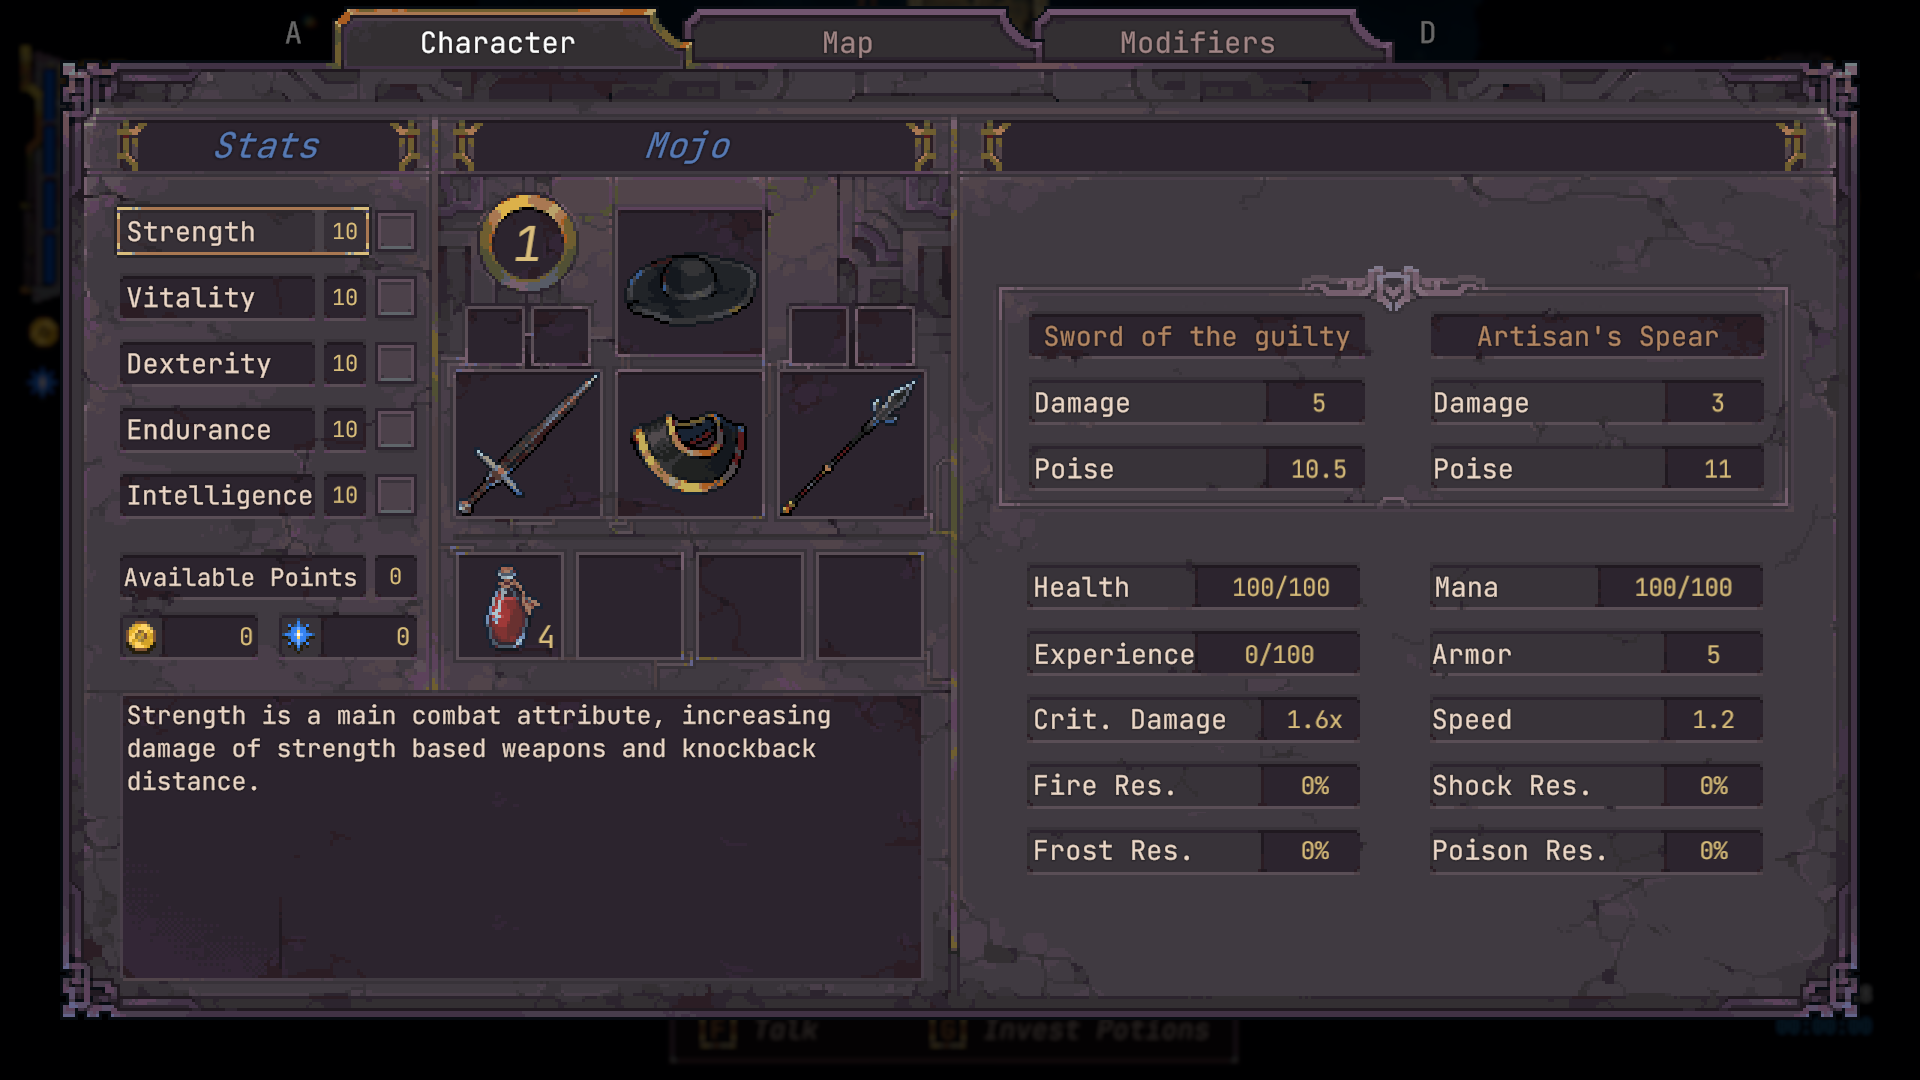 The Game's inventory and stat screens